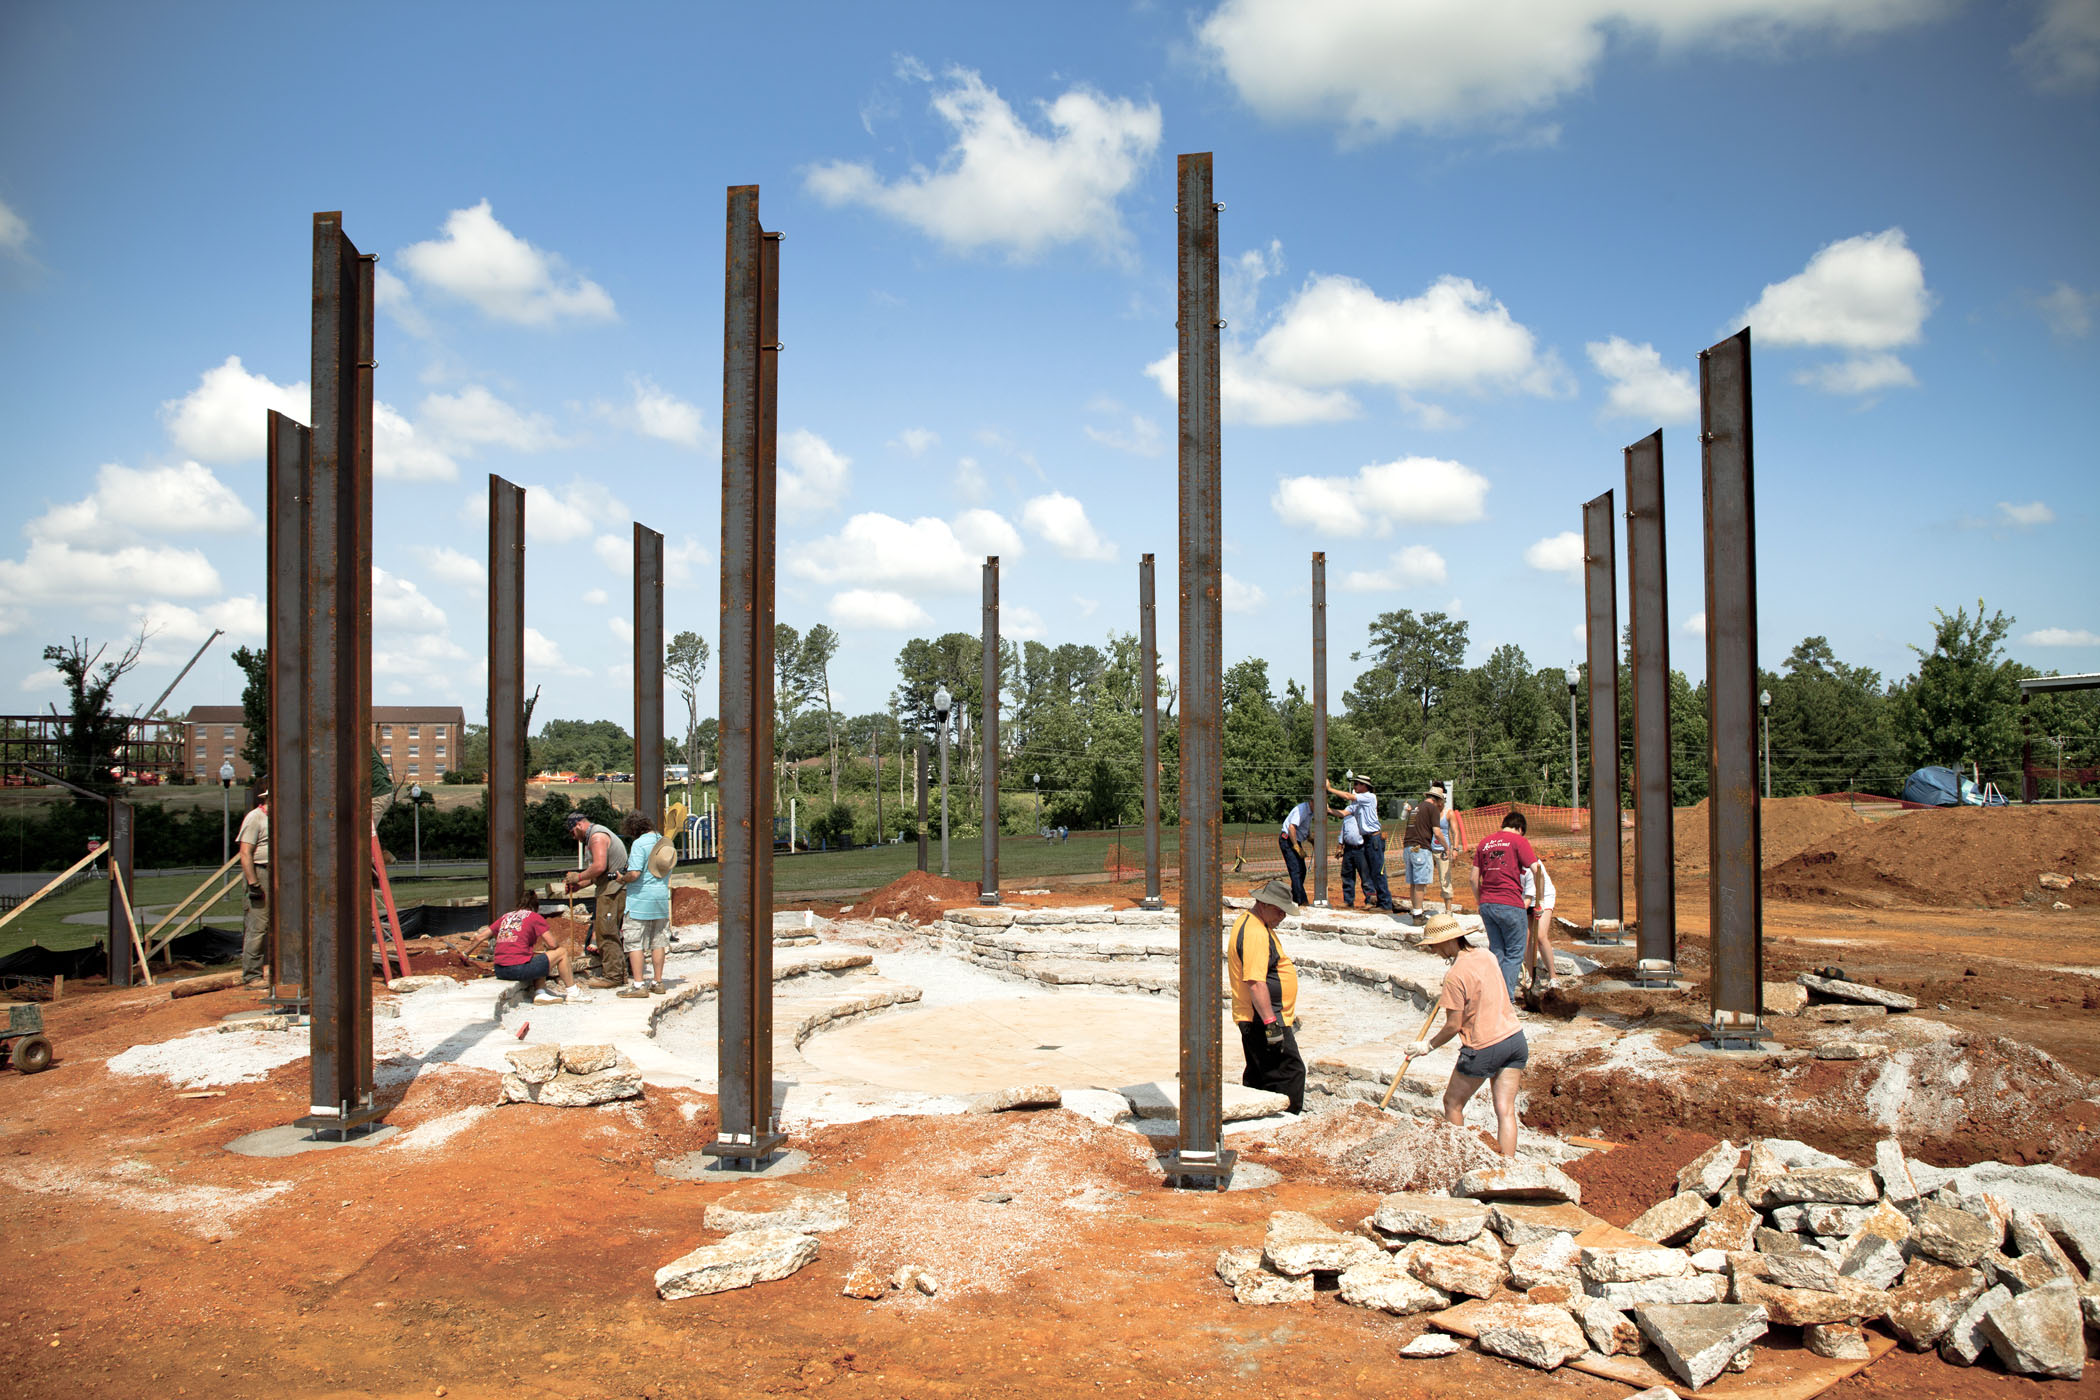 Volunteers build the Alberta Gathering Place in Tuscaloosa, Alabama, with the help of Seattle's Pomegranate Center and Tully's Coffee.